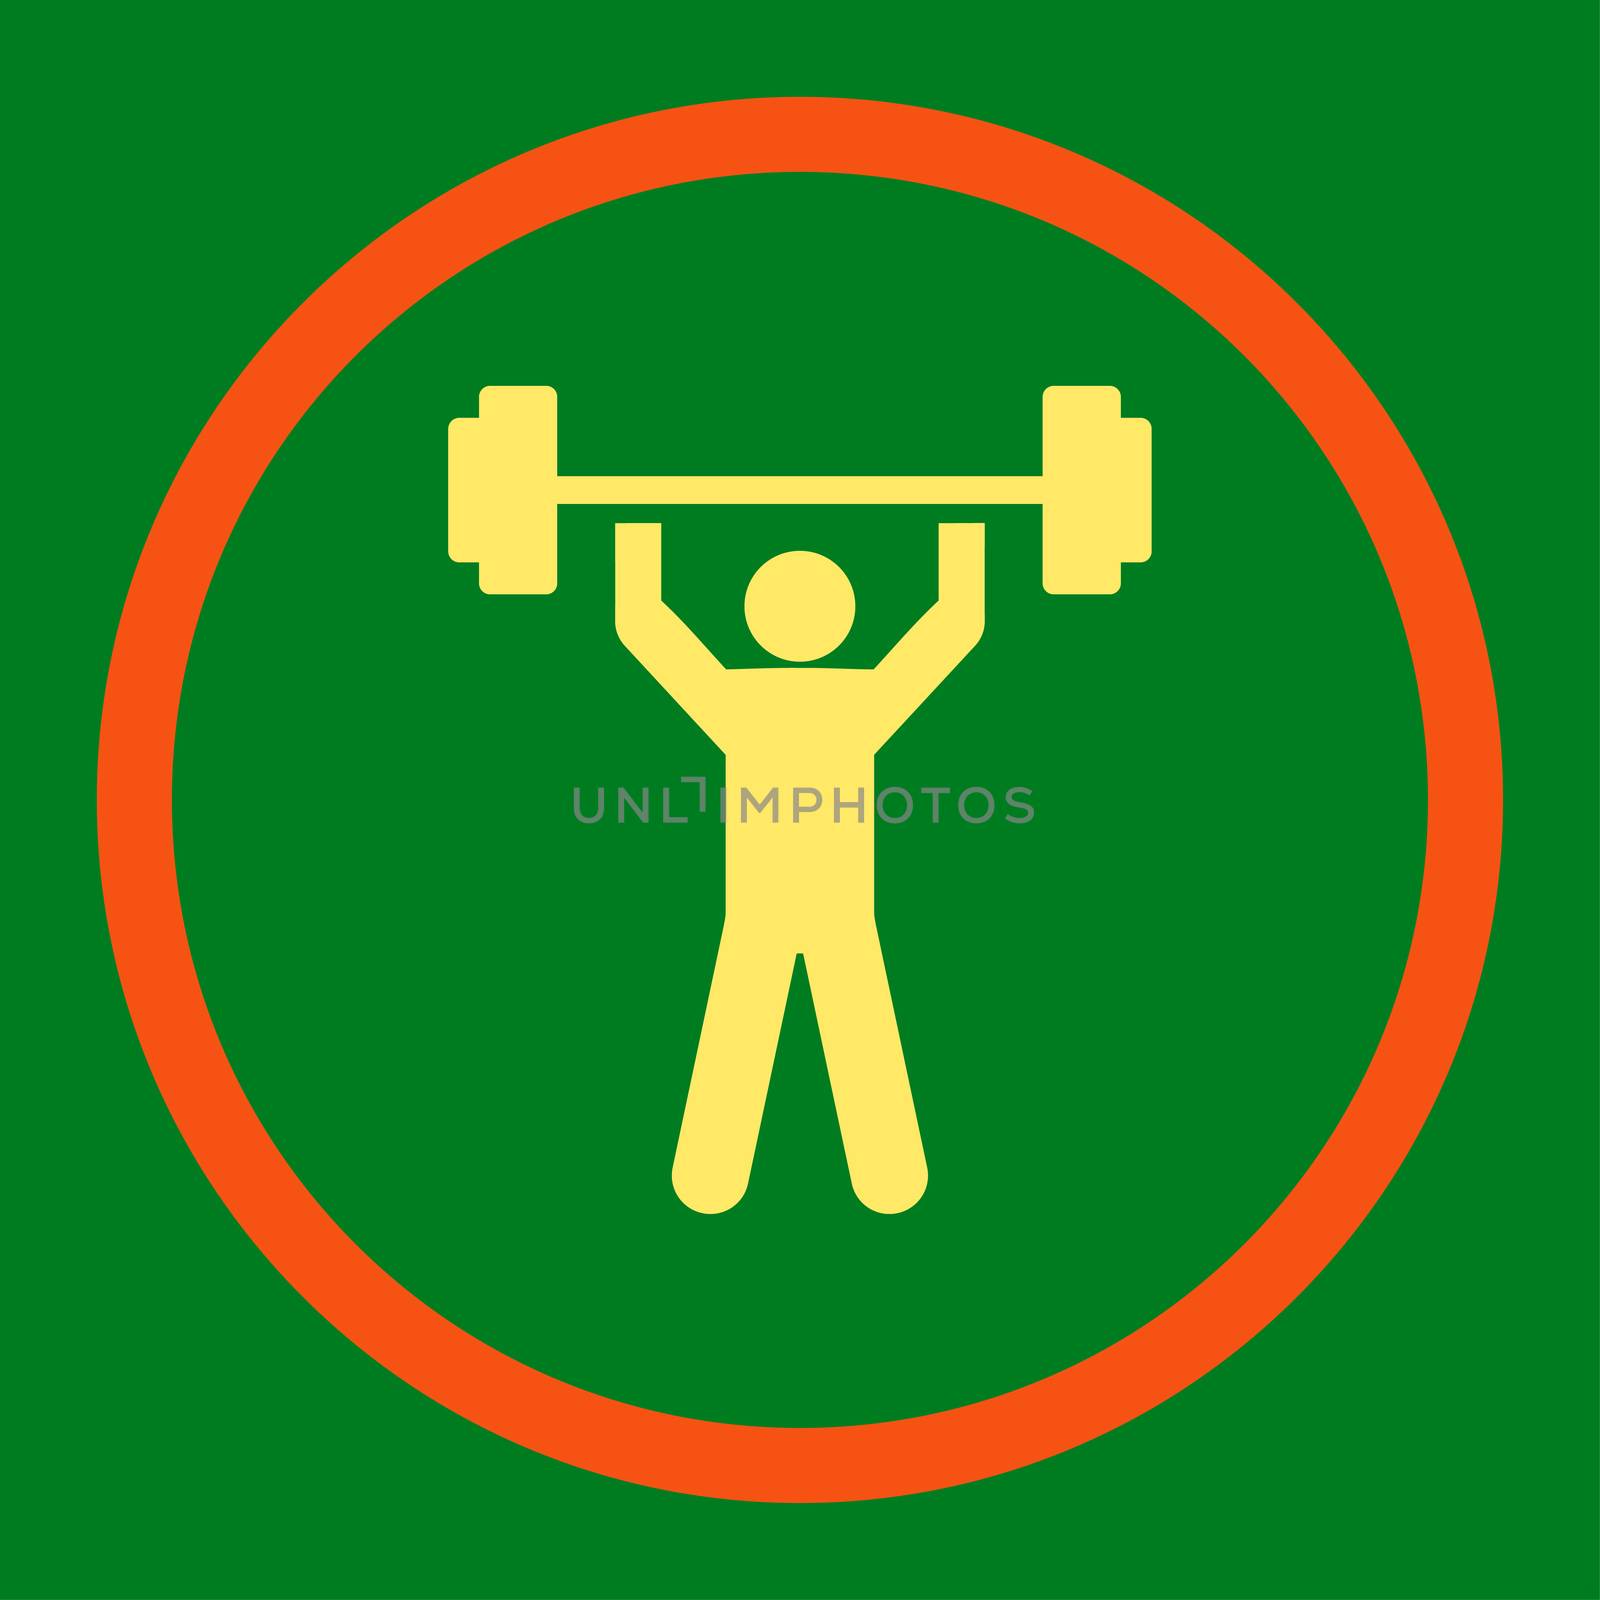 Power lifting icon. This rounded flat symbol is drawn with orange and yellow colors on a green background.